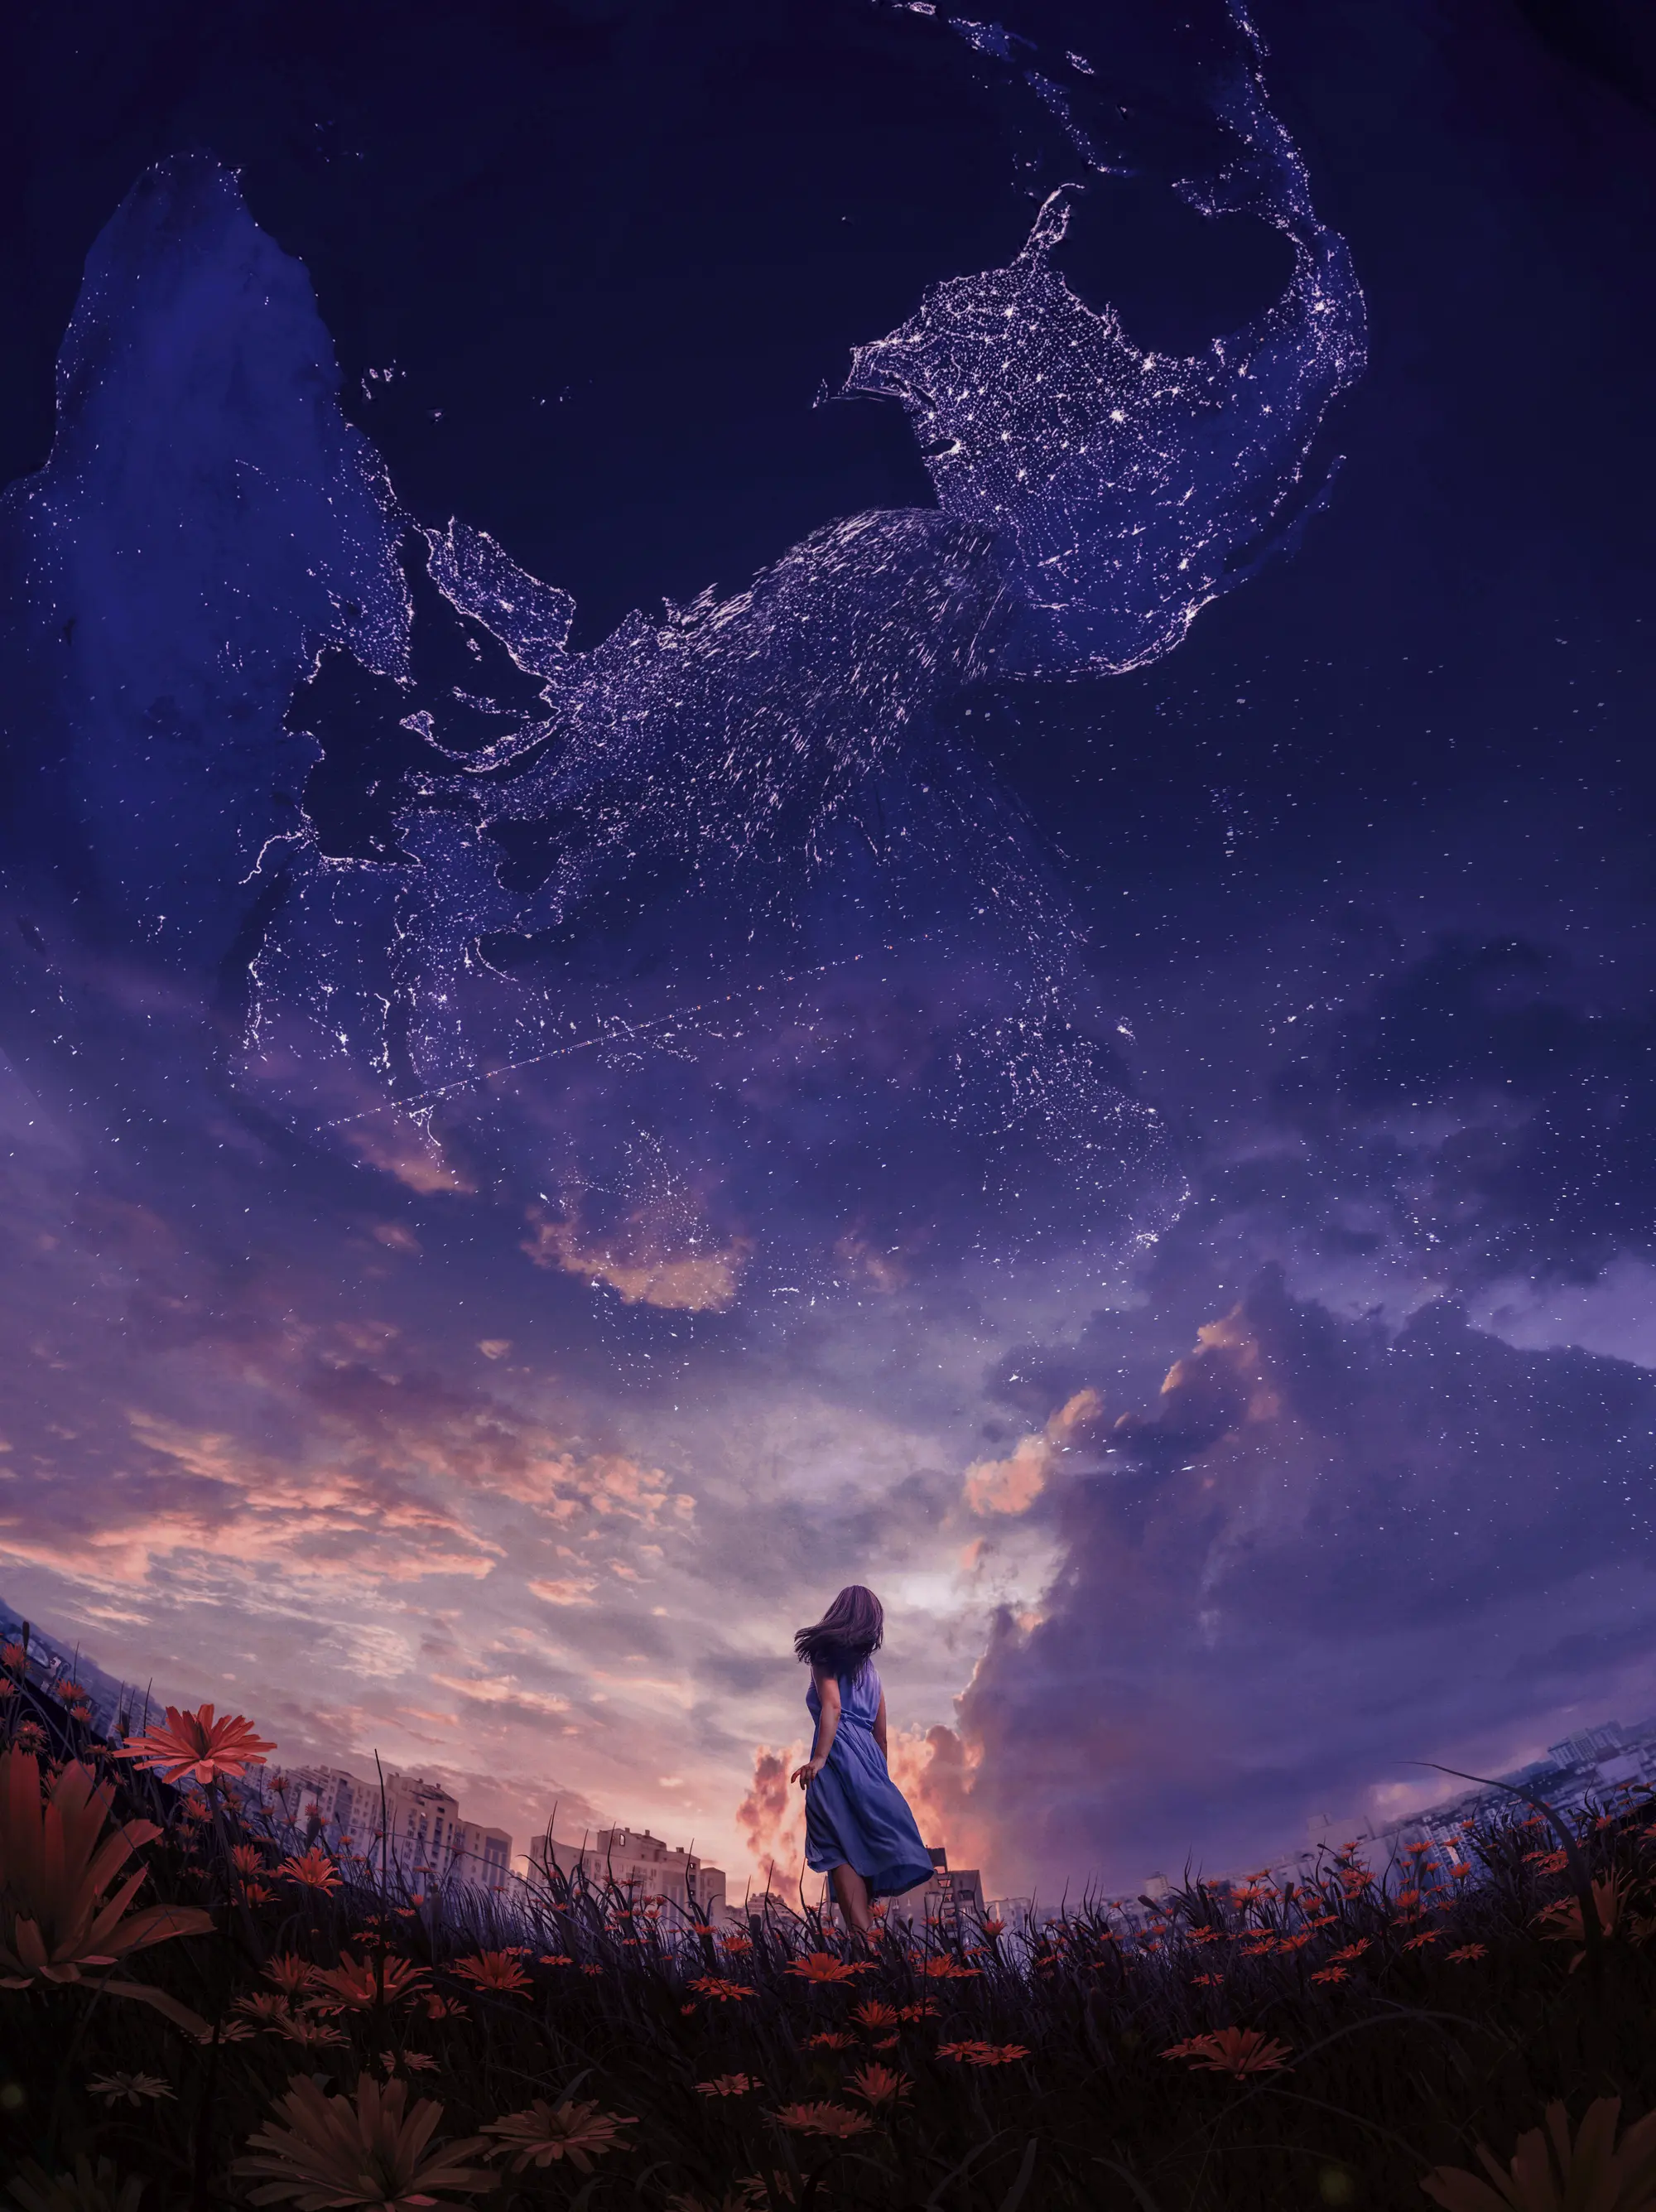 Artwork by Katrina Yu showing a women looking up at the stars